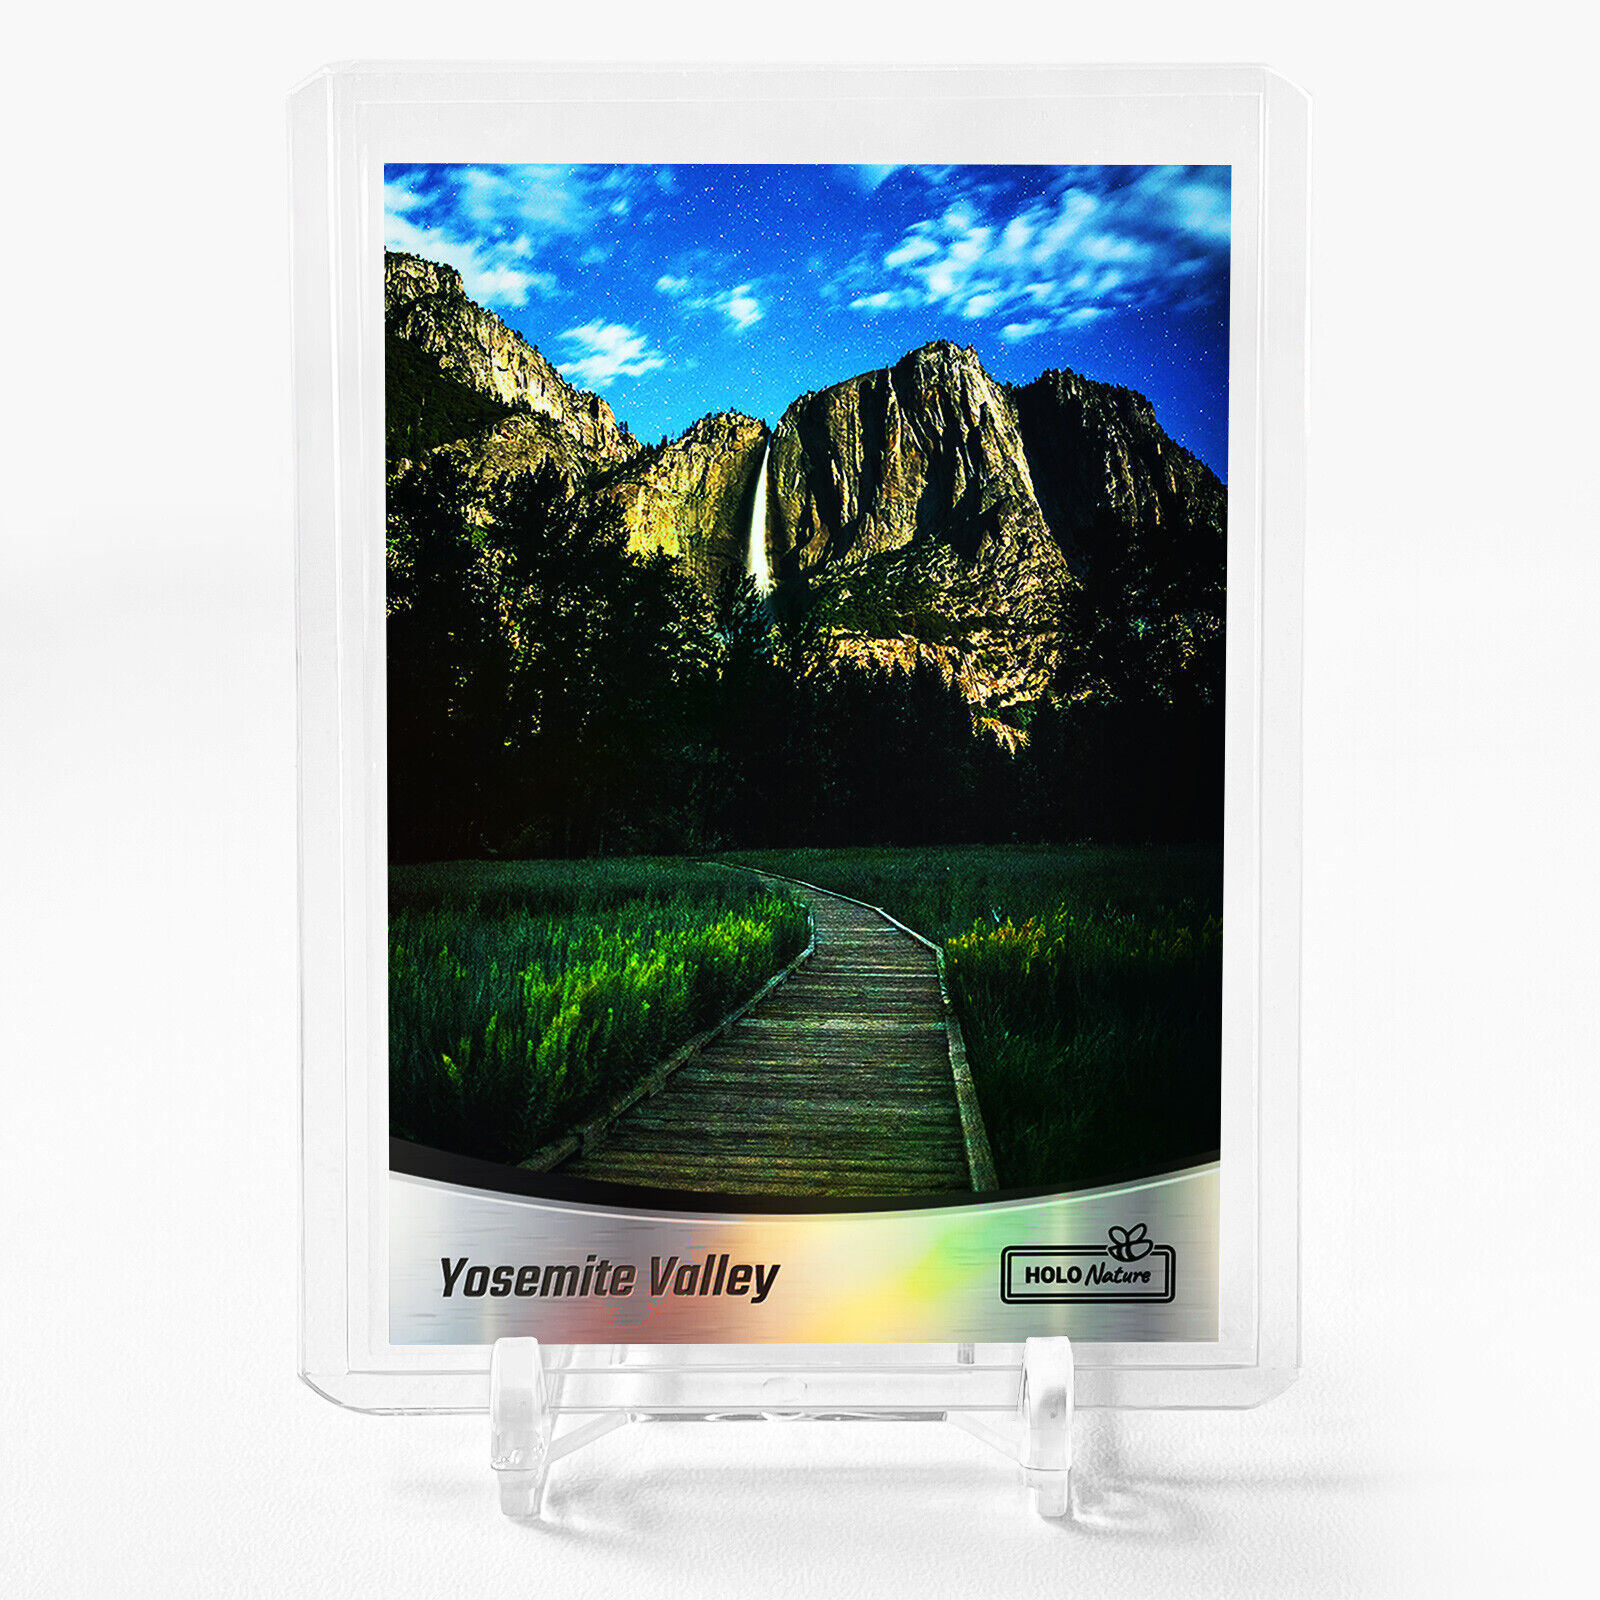 YOSEMITE VALLEY Holographic Photo Card 2024 GleeBeeCo Holo Nature #SWT5